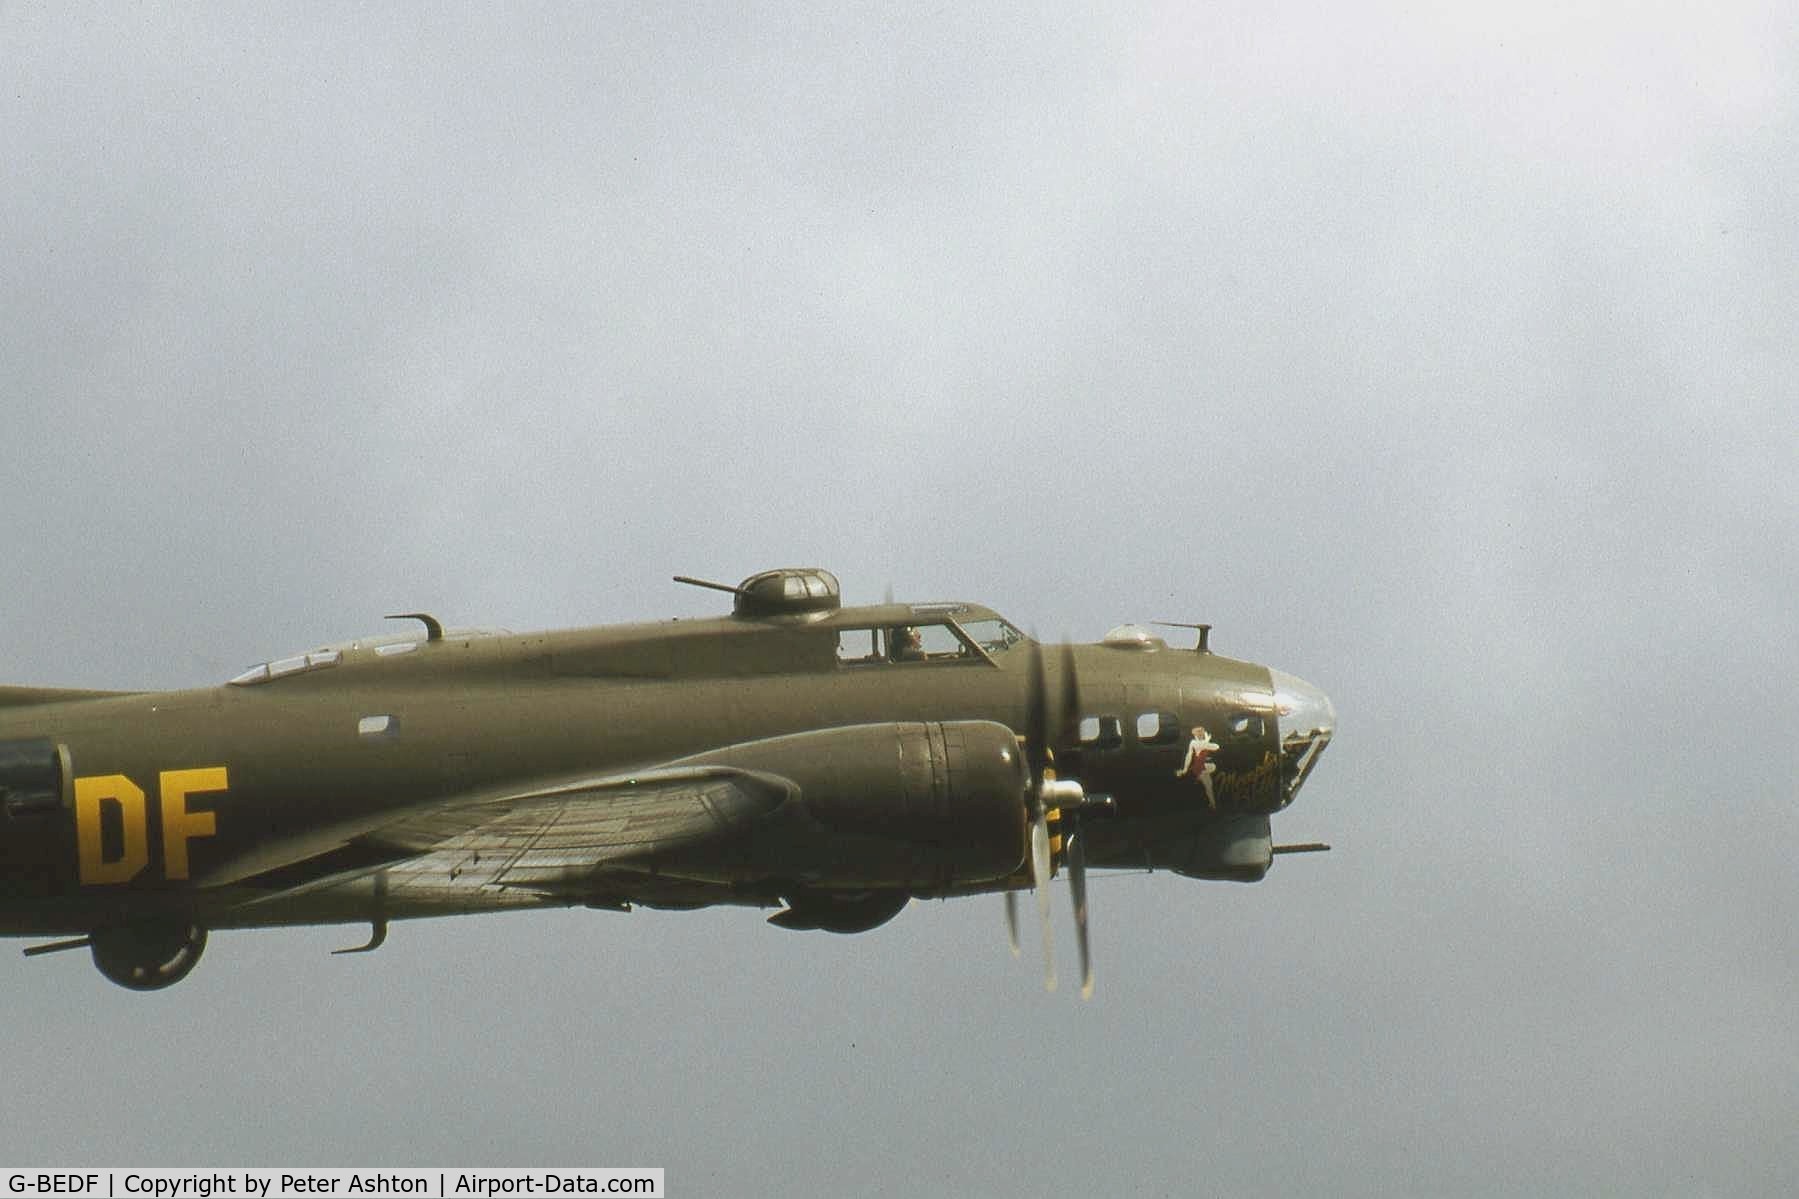 G-BEDF, 1944 Boeing B-17G Flying Fortress C/N 8693, Old Warden, Bedfordshire, England. August 1993